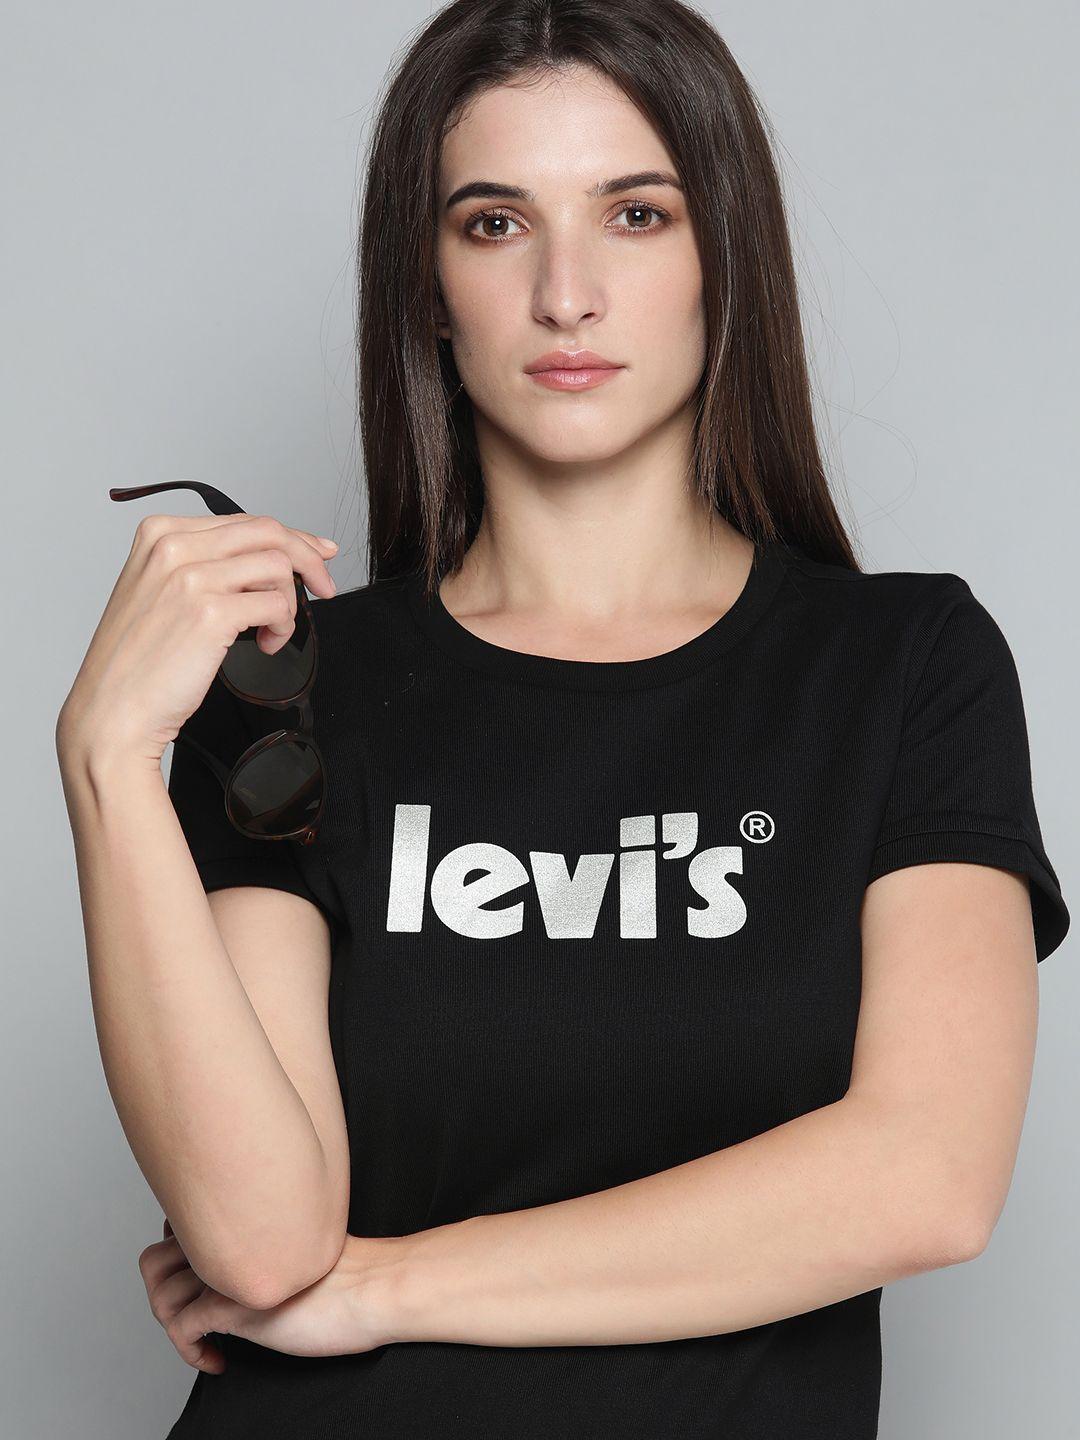 levis-women-navy-blue-typography-printed-casual-dress